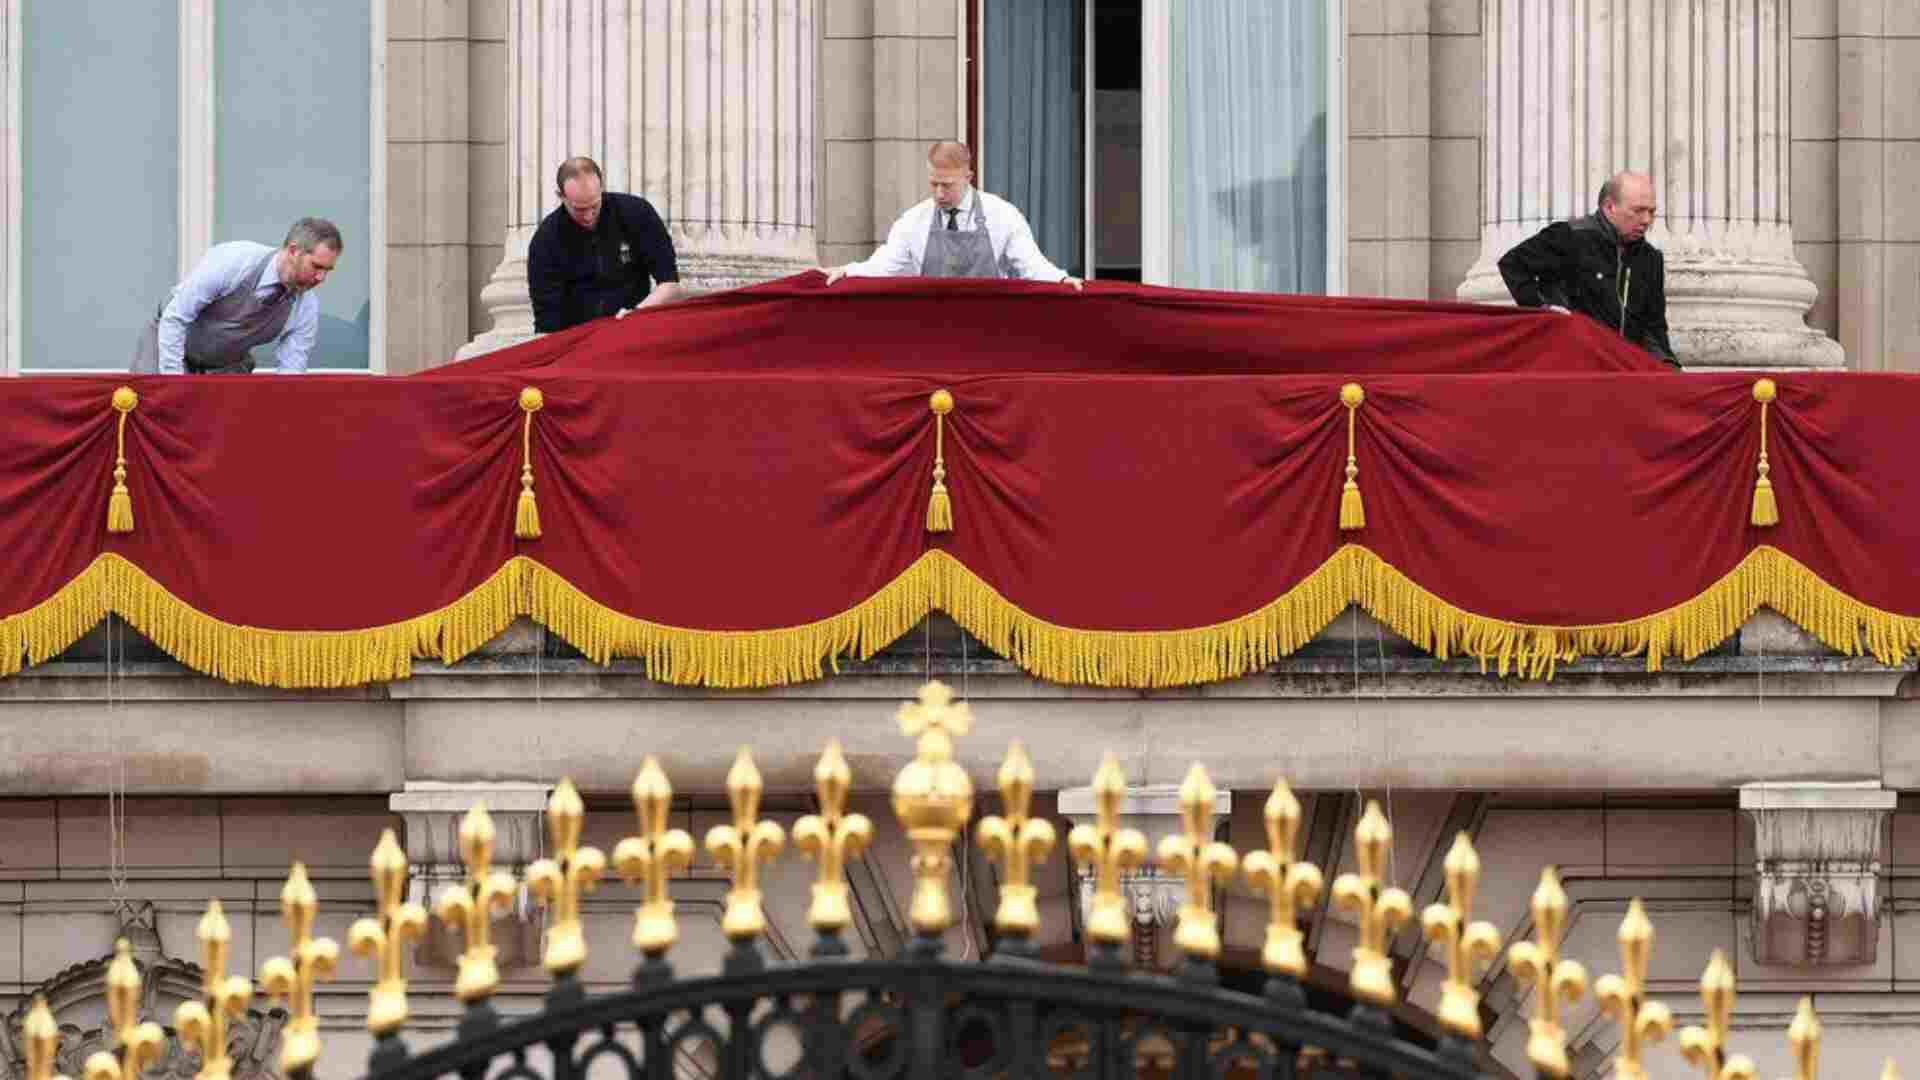 Buckingham Palace Balcony Room To Open For Rare Public Viewing